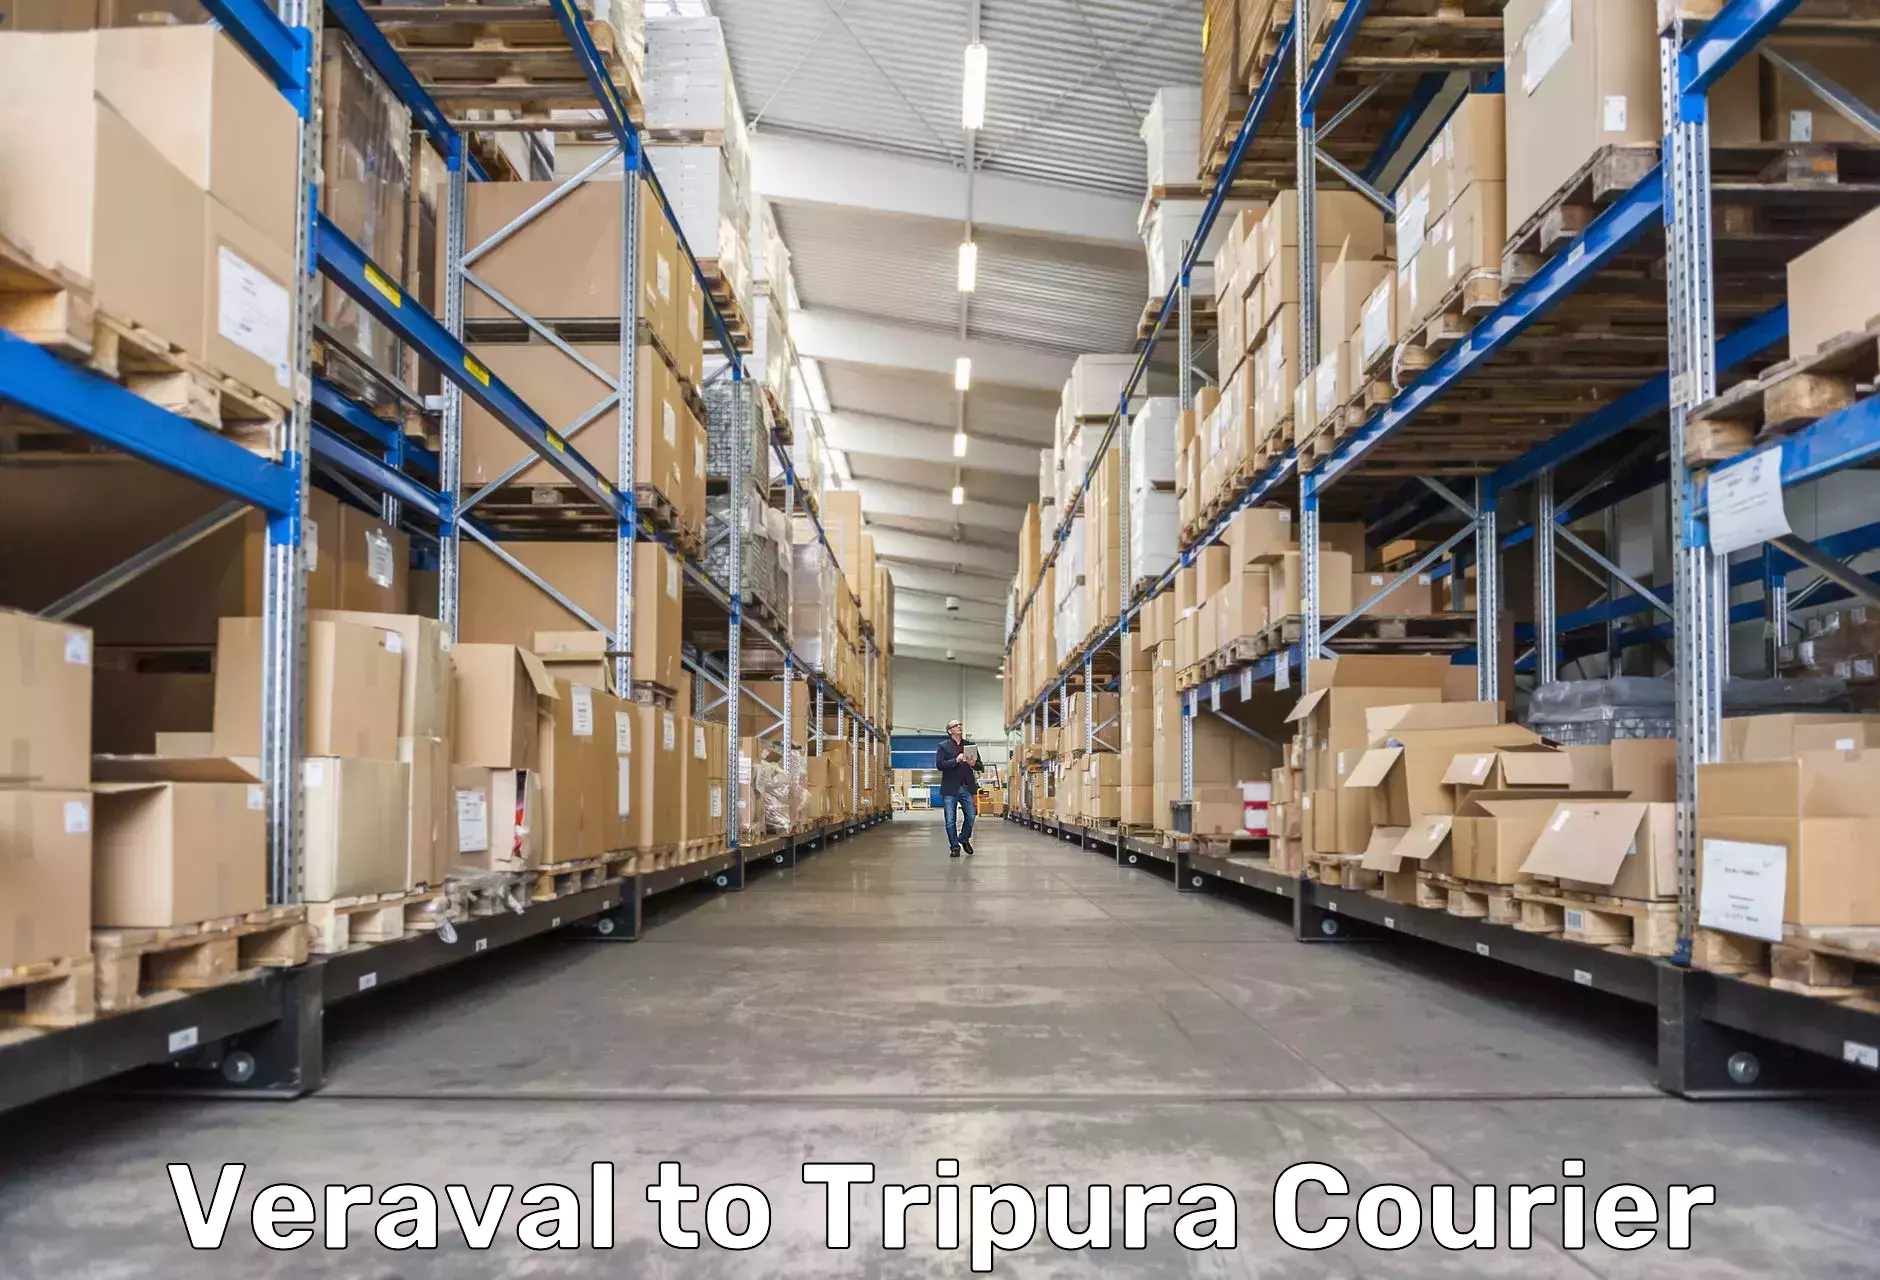 Online shipping calculator Veraval to Udaipur Tripura